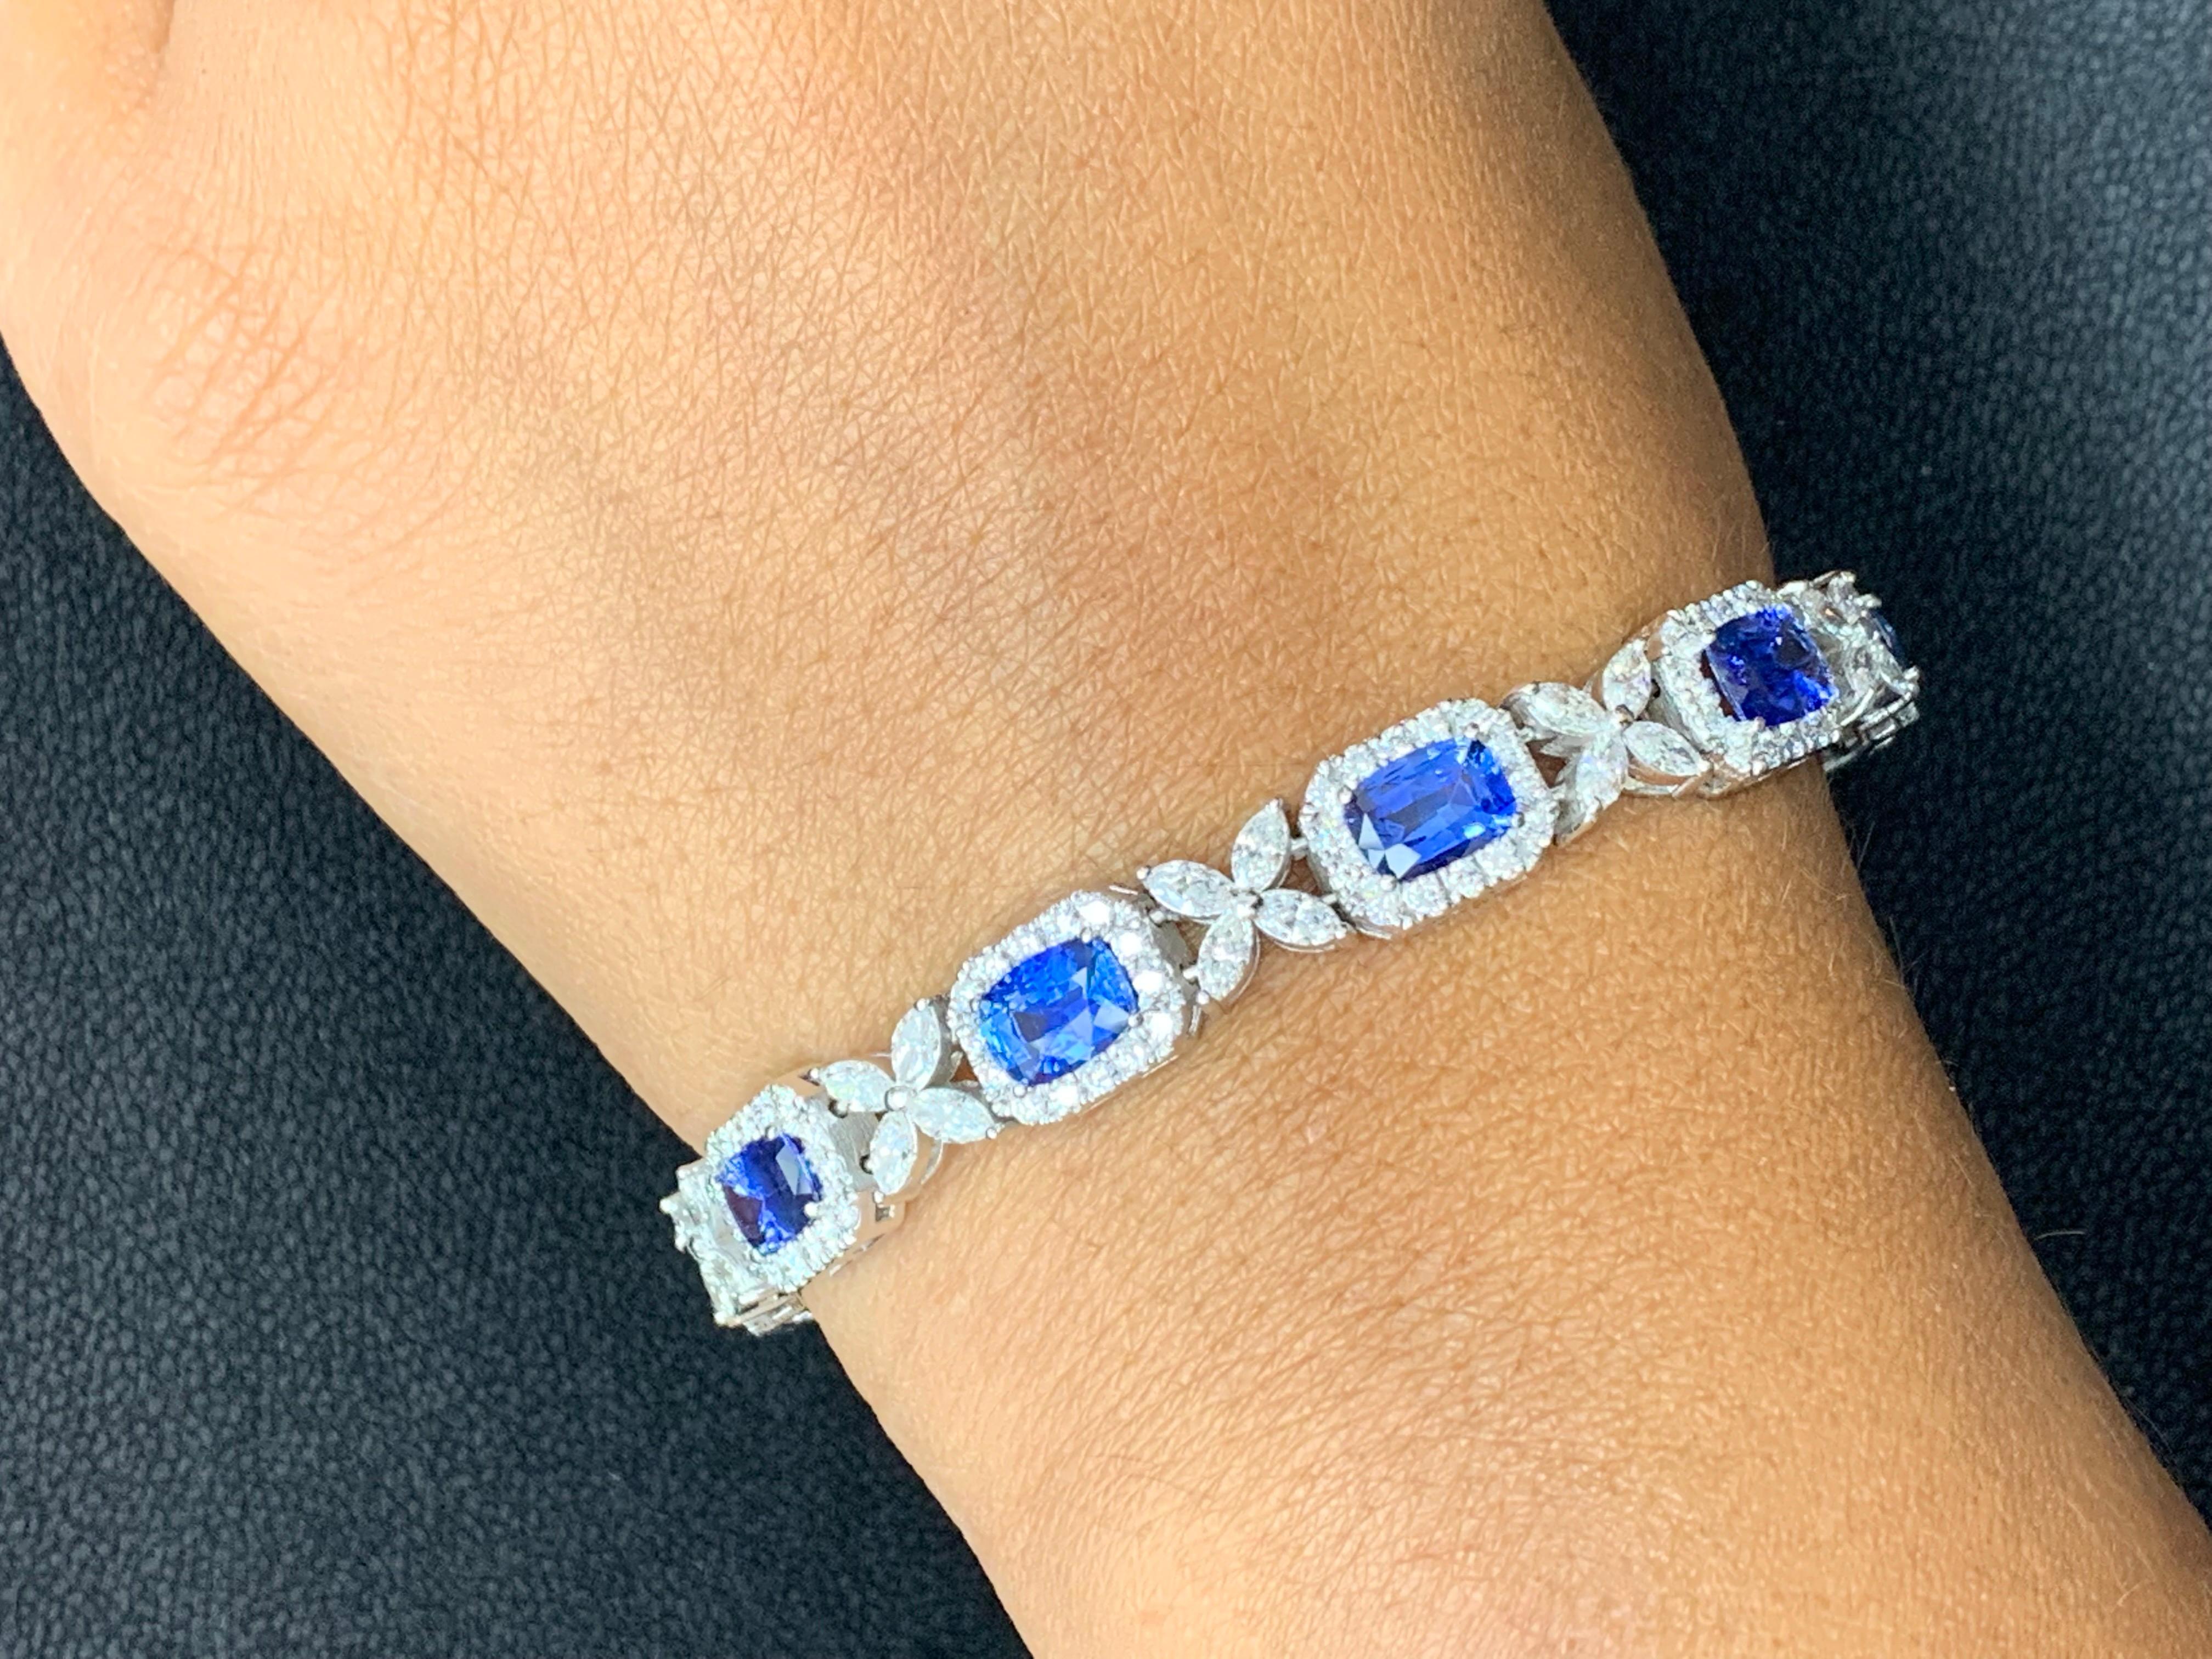 10.47 Carat Cushion cut Sapphire and Diamond Bracelet in 14K White Gold For Sale 5